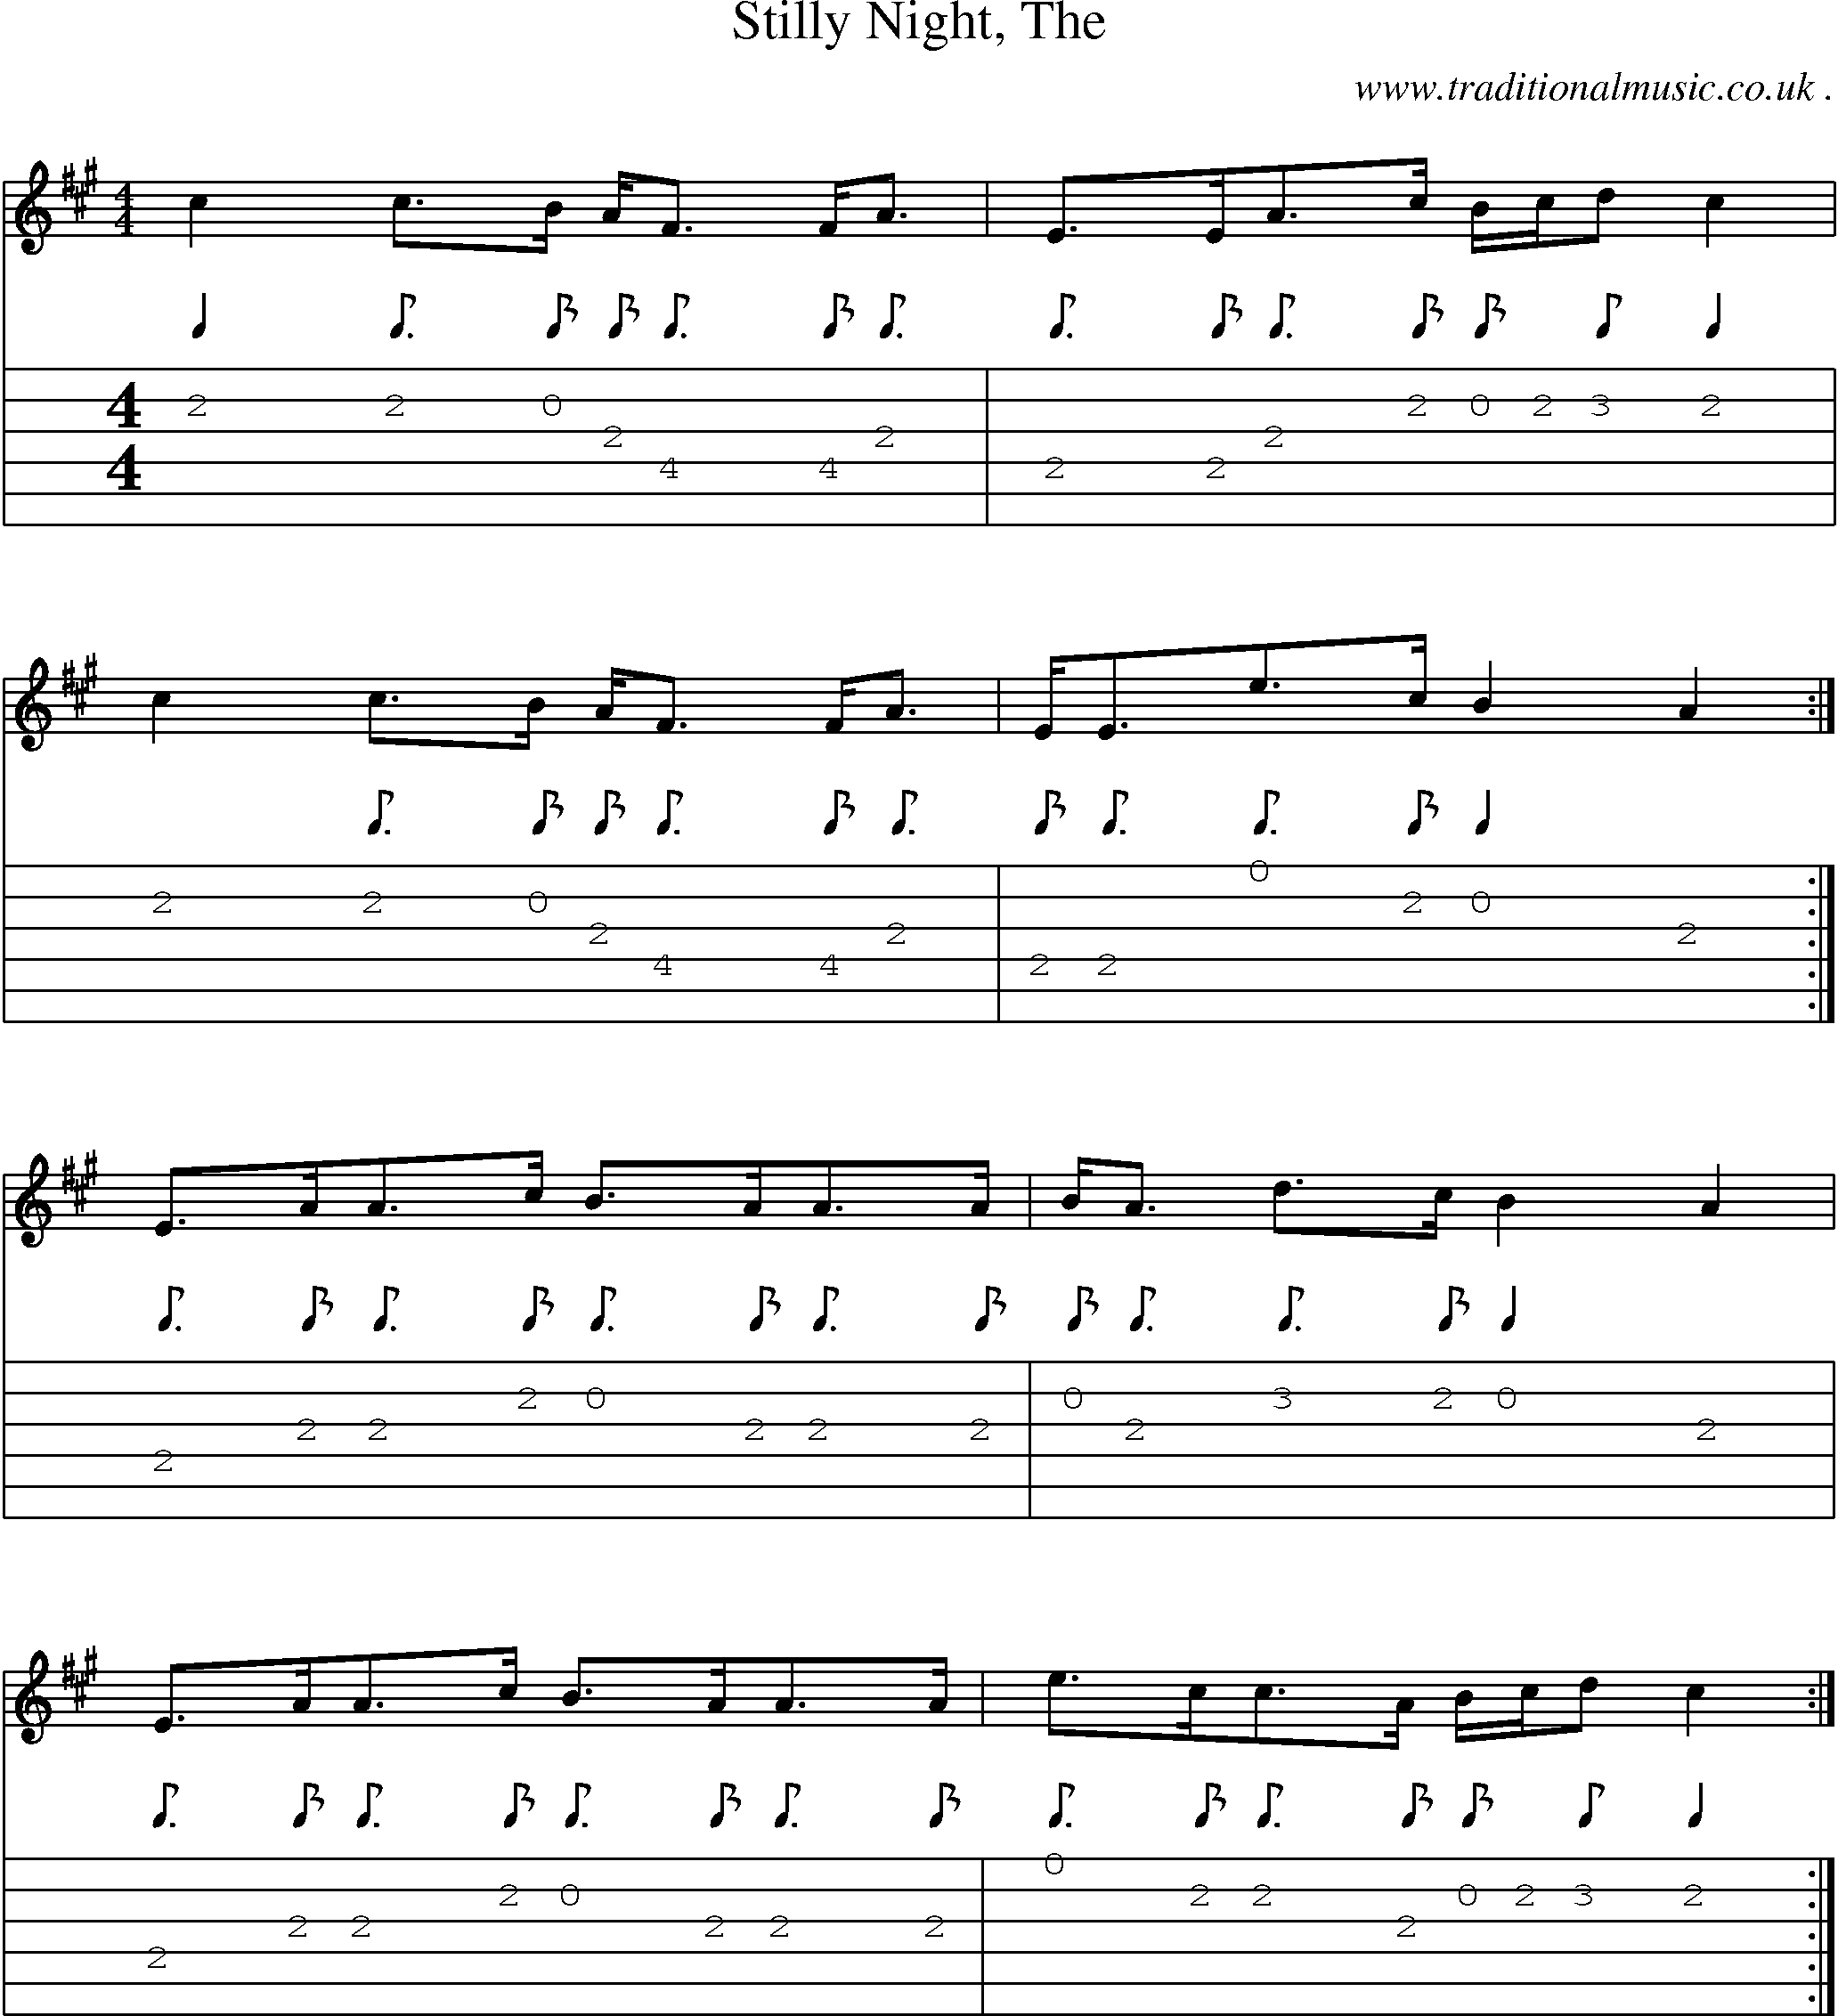 Sheet-music  score, Chords and Guitar Tabs for Stilly Night The